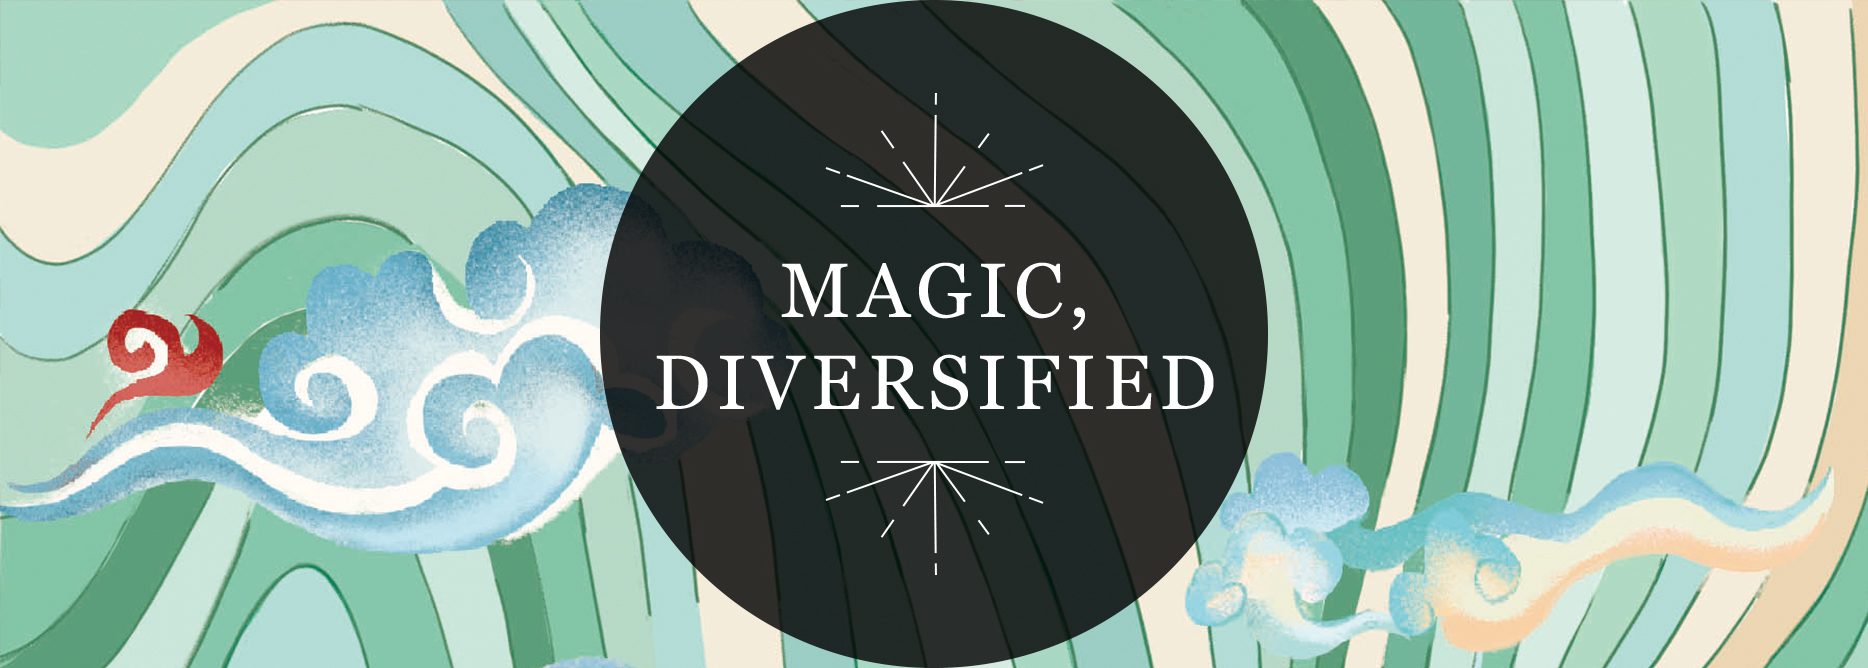 RP Mystic - Graphic image leading to 'Magic, Diversified' Category page